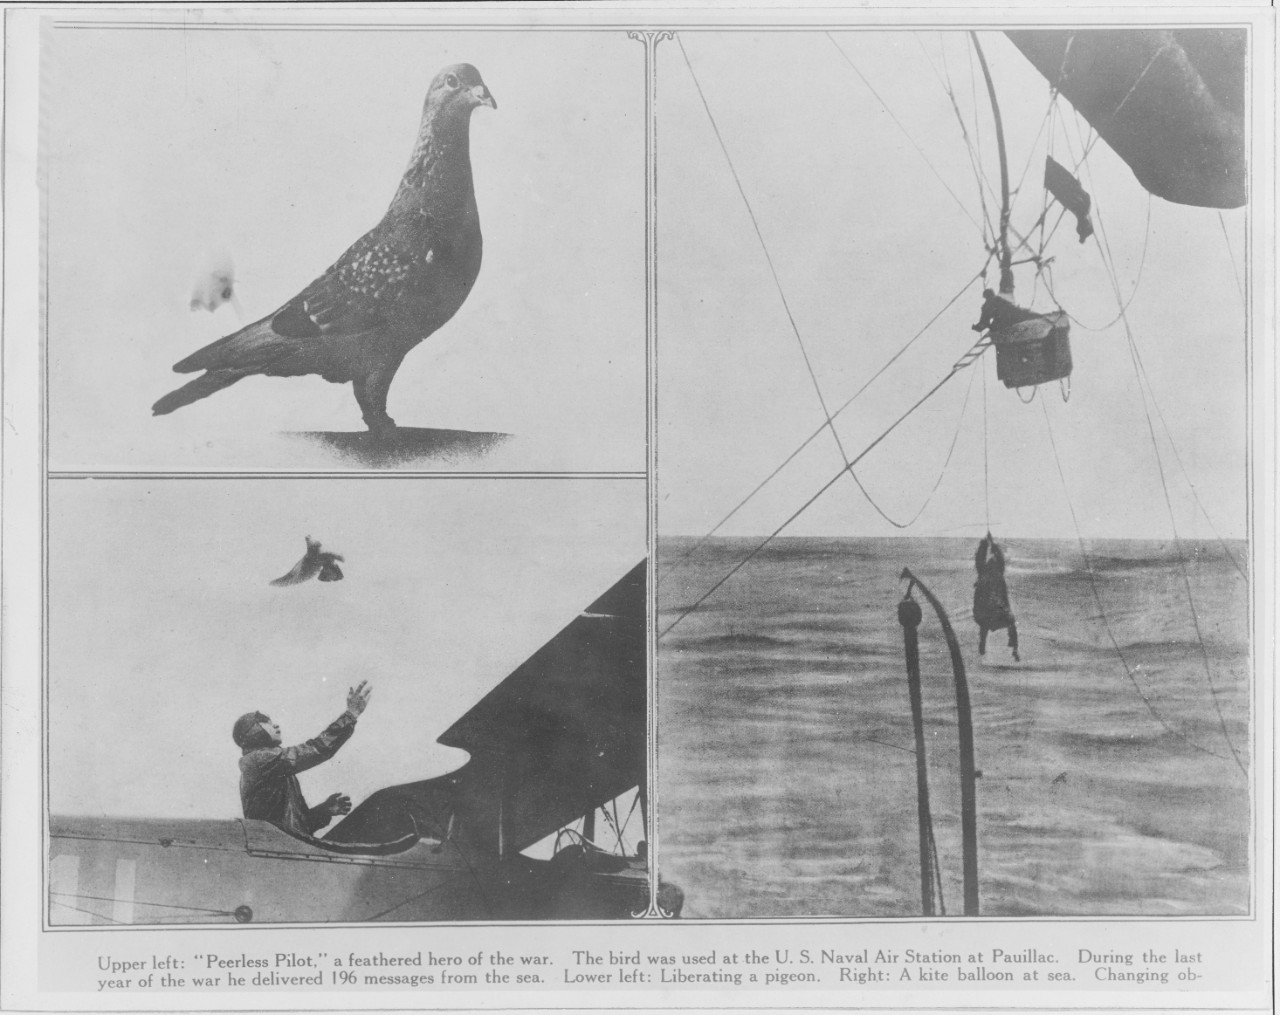 Pigeon "PEERLESS PILOT", a feathered hero of the war. Lower left: Liberating a pigeon. Right: A kite balloon at sea.